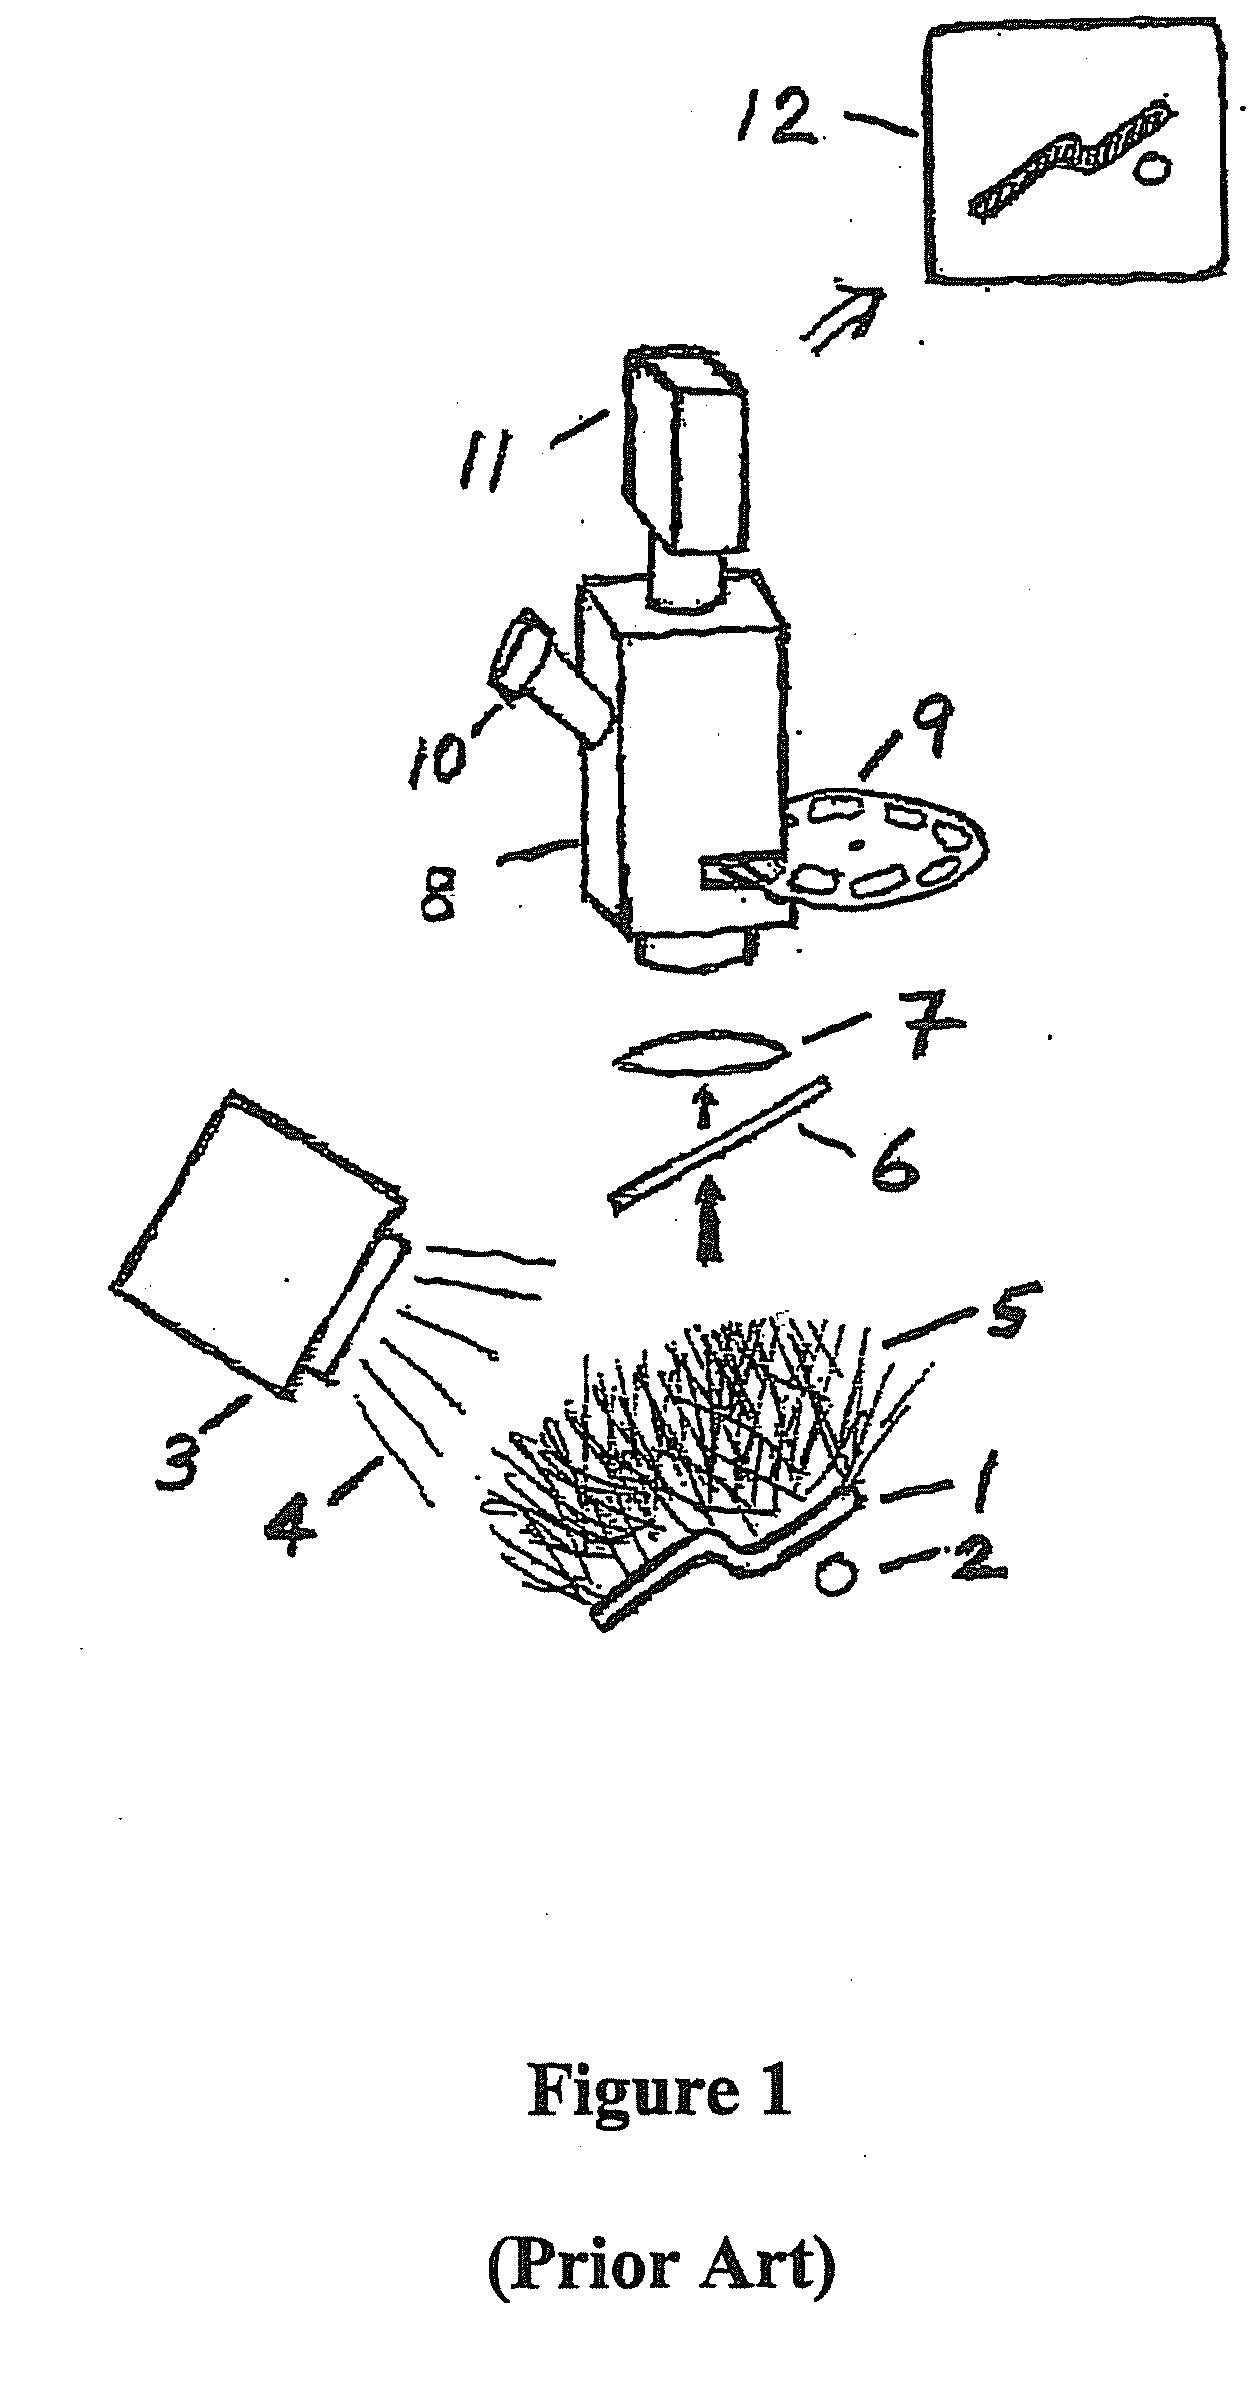 Method for improved forensic analysis